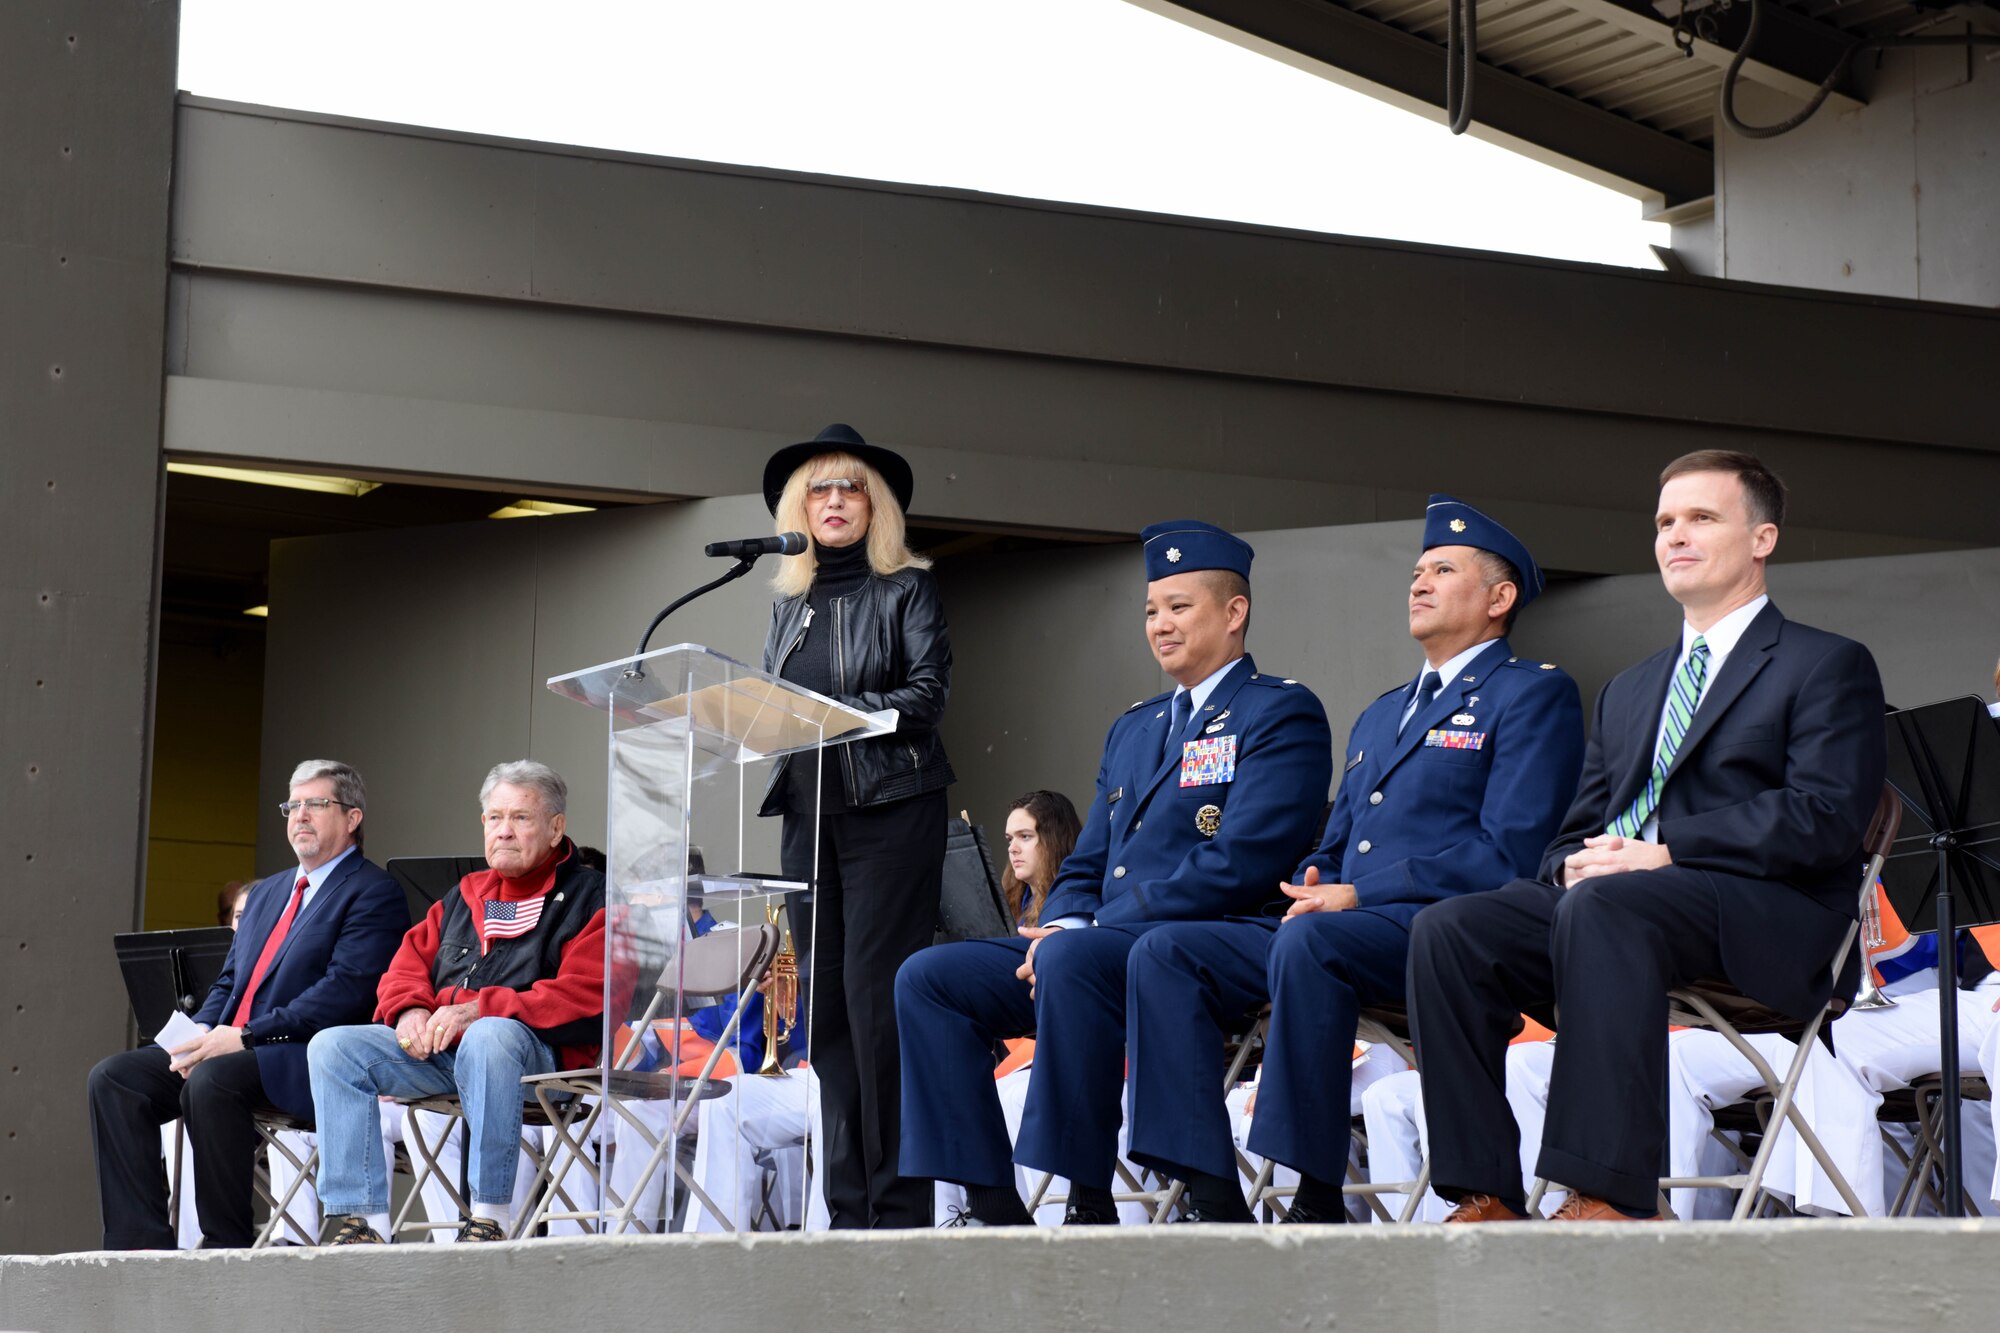 San Angelo Mayor, Brenda Gunter speaks during the Hero’s Hunt Honor Concert at the Bill Aylor Sr. Memorial RiverStage in San Angelo, Texas, Dec. 6, 2018. Gunter thanked the wounded veterans for their service. (U.S. Air Force photo by Senior Airman Randall Moose/Released)